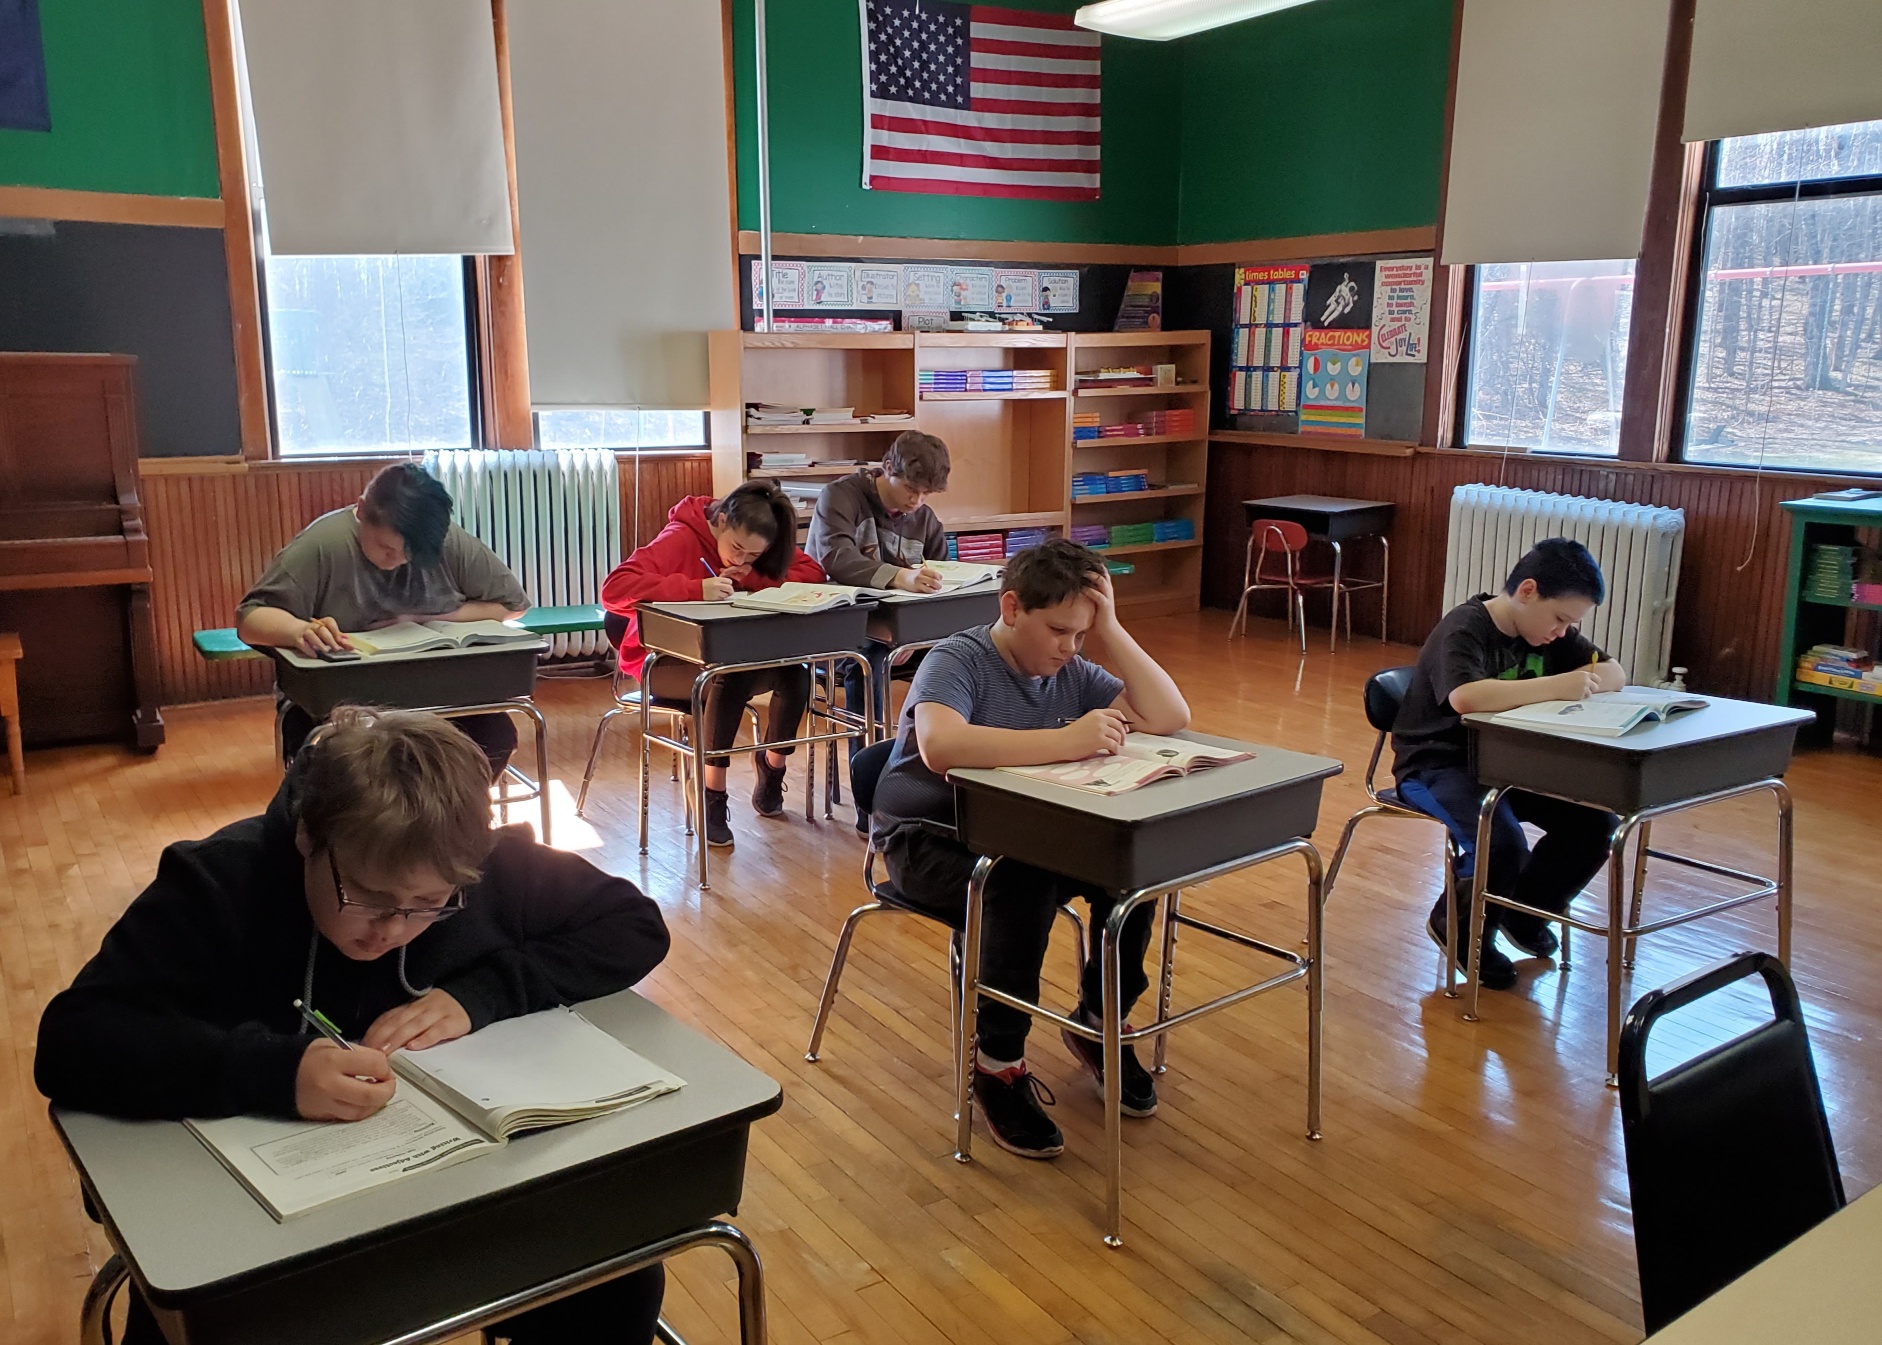 Students studying at their desks in the classroom